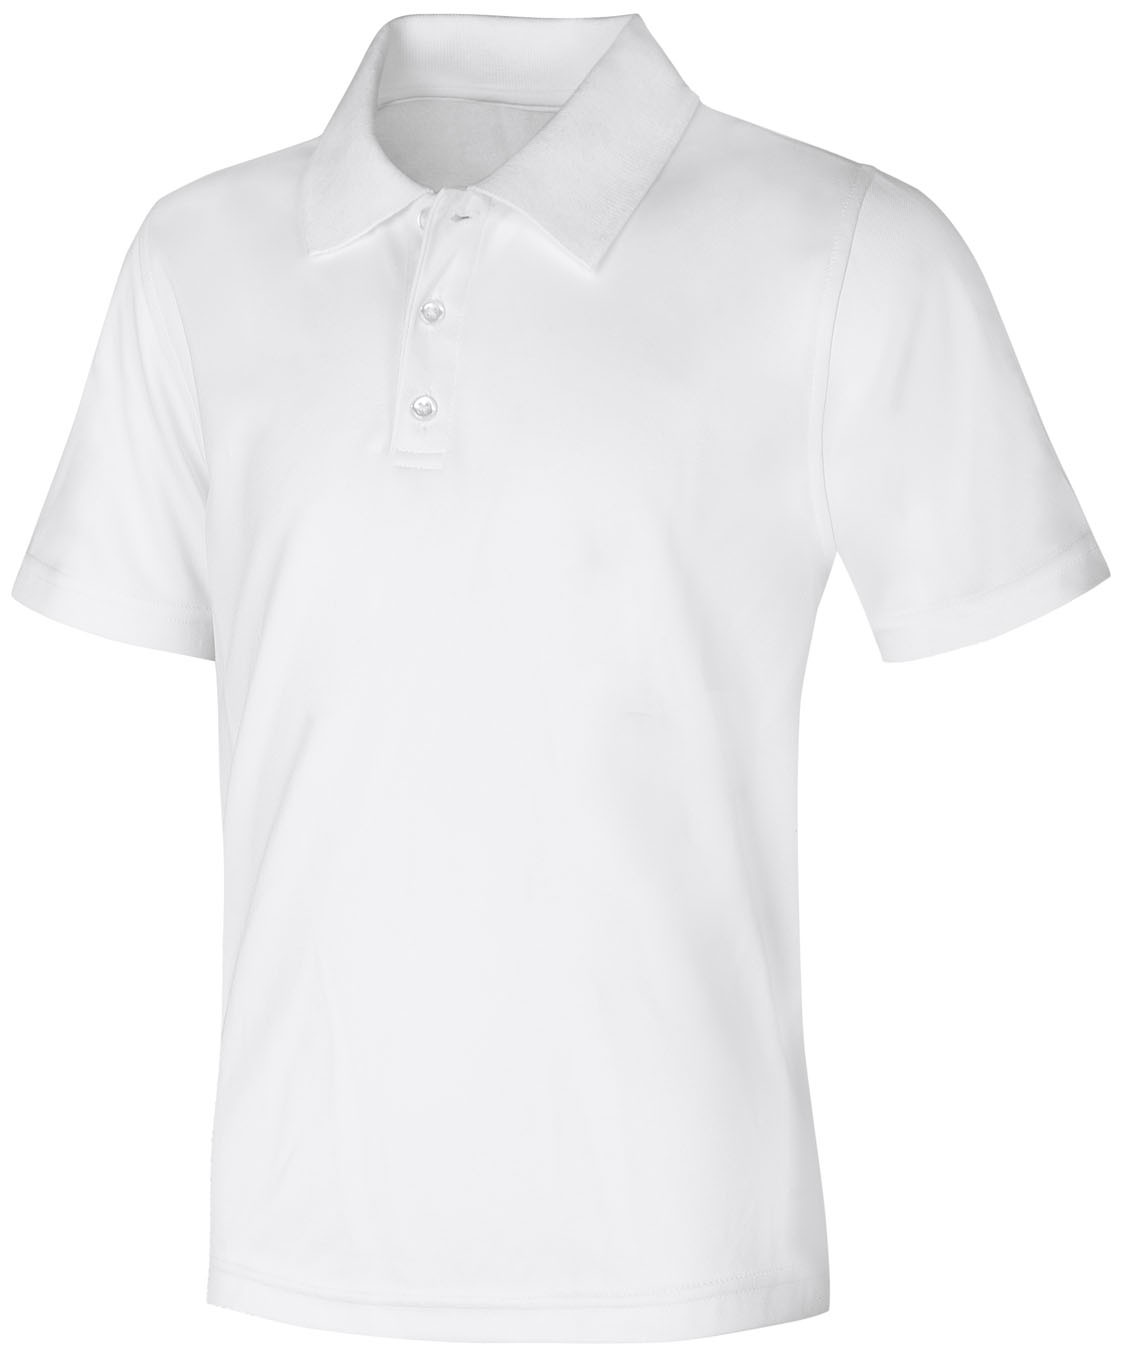 Smooth/Jersey Polo - Short Sleeve